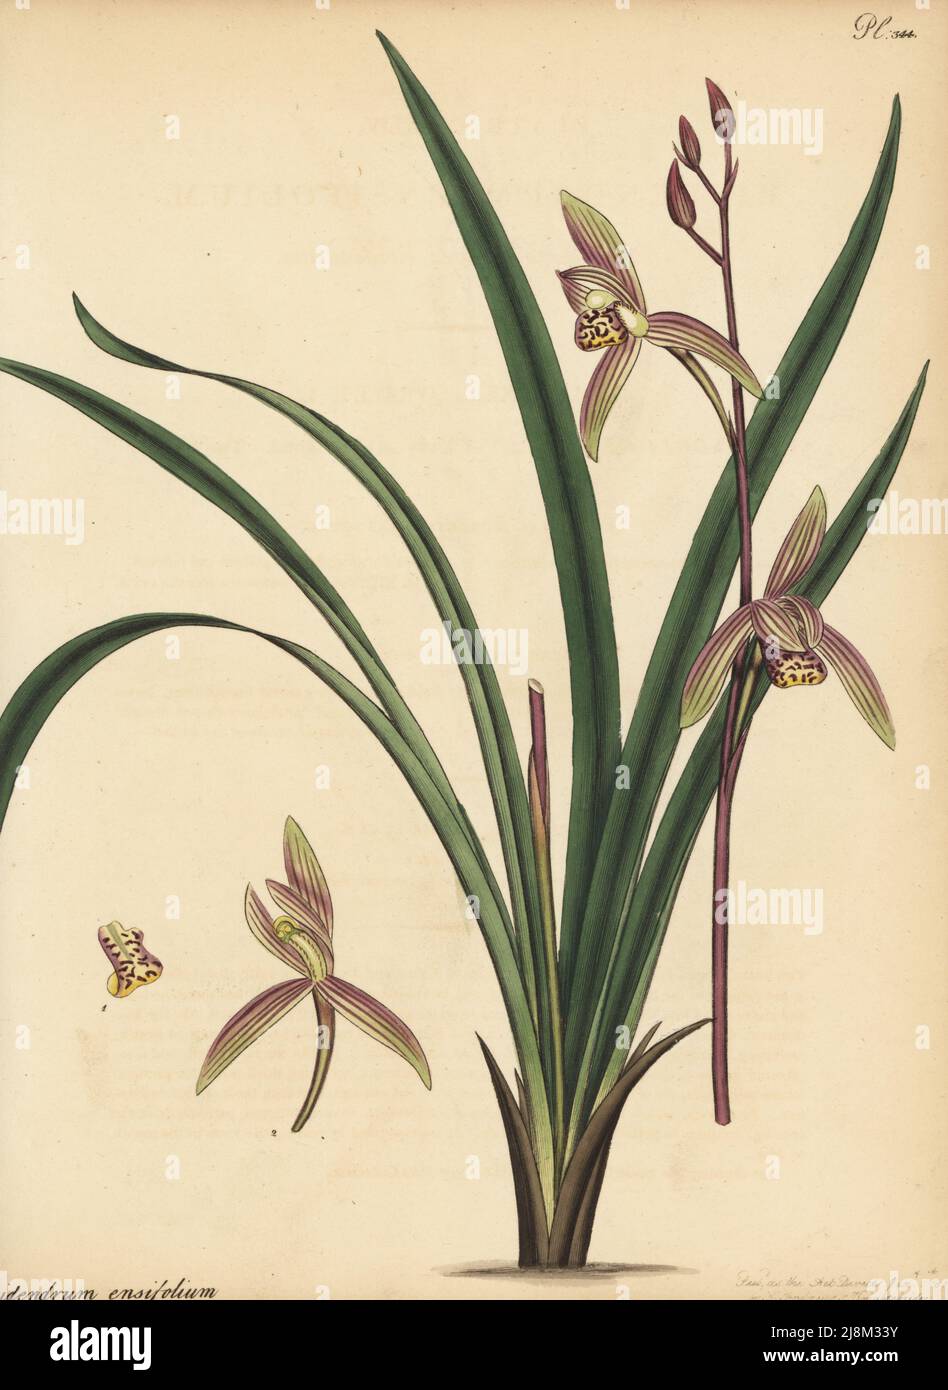 Four-season orchid, Cymbidium ensifolium. Sword-shaped-leaved epidendrum, Epidendrum ensifolium. From China and Japan, introduced to the gardens of Mary Bright, the Marchioness of Rockingham, sketched at the George Hibbert herbarium, Hibbertian collection. Copperplate engraving drawn, engraved and hand-coloured by Henry Andrews from his Botanical Register, Volume 5, self-published in Knightsbridge, London, 1804. Stock Photo